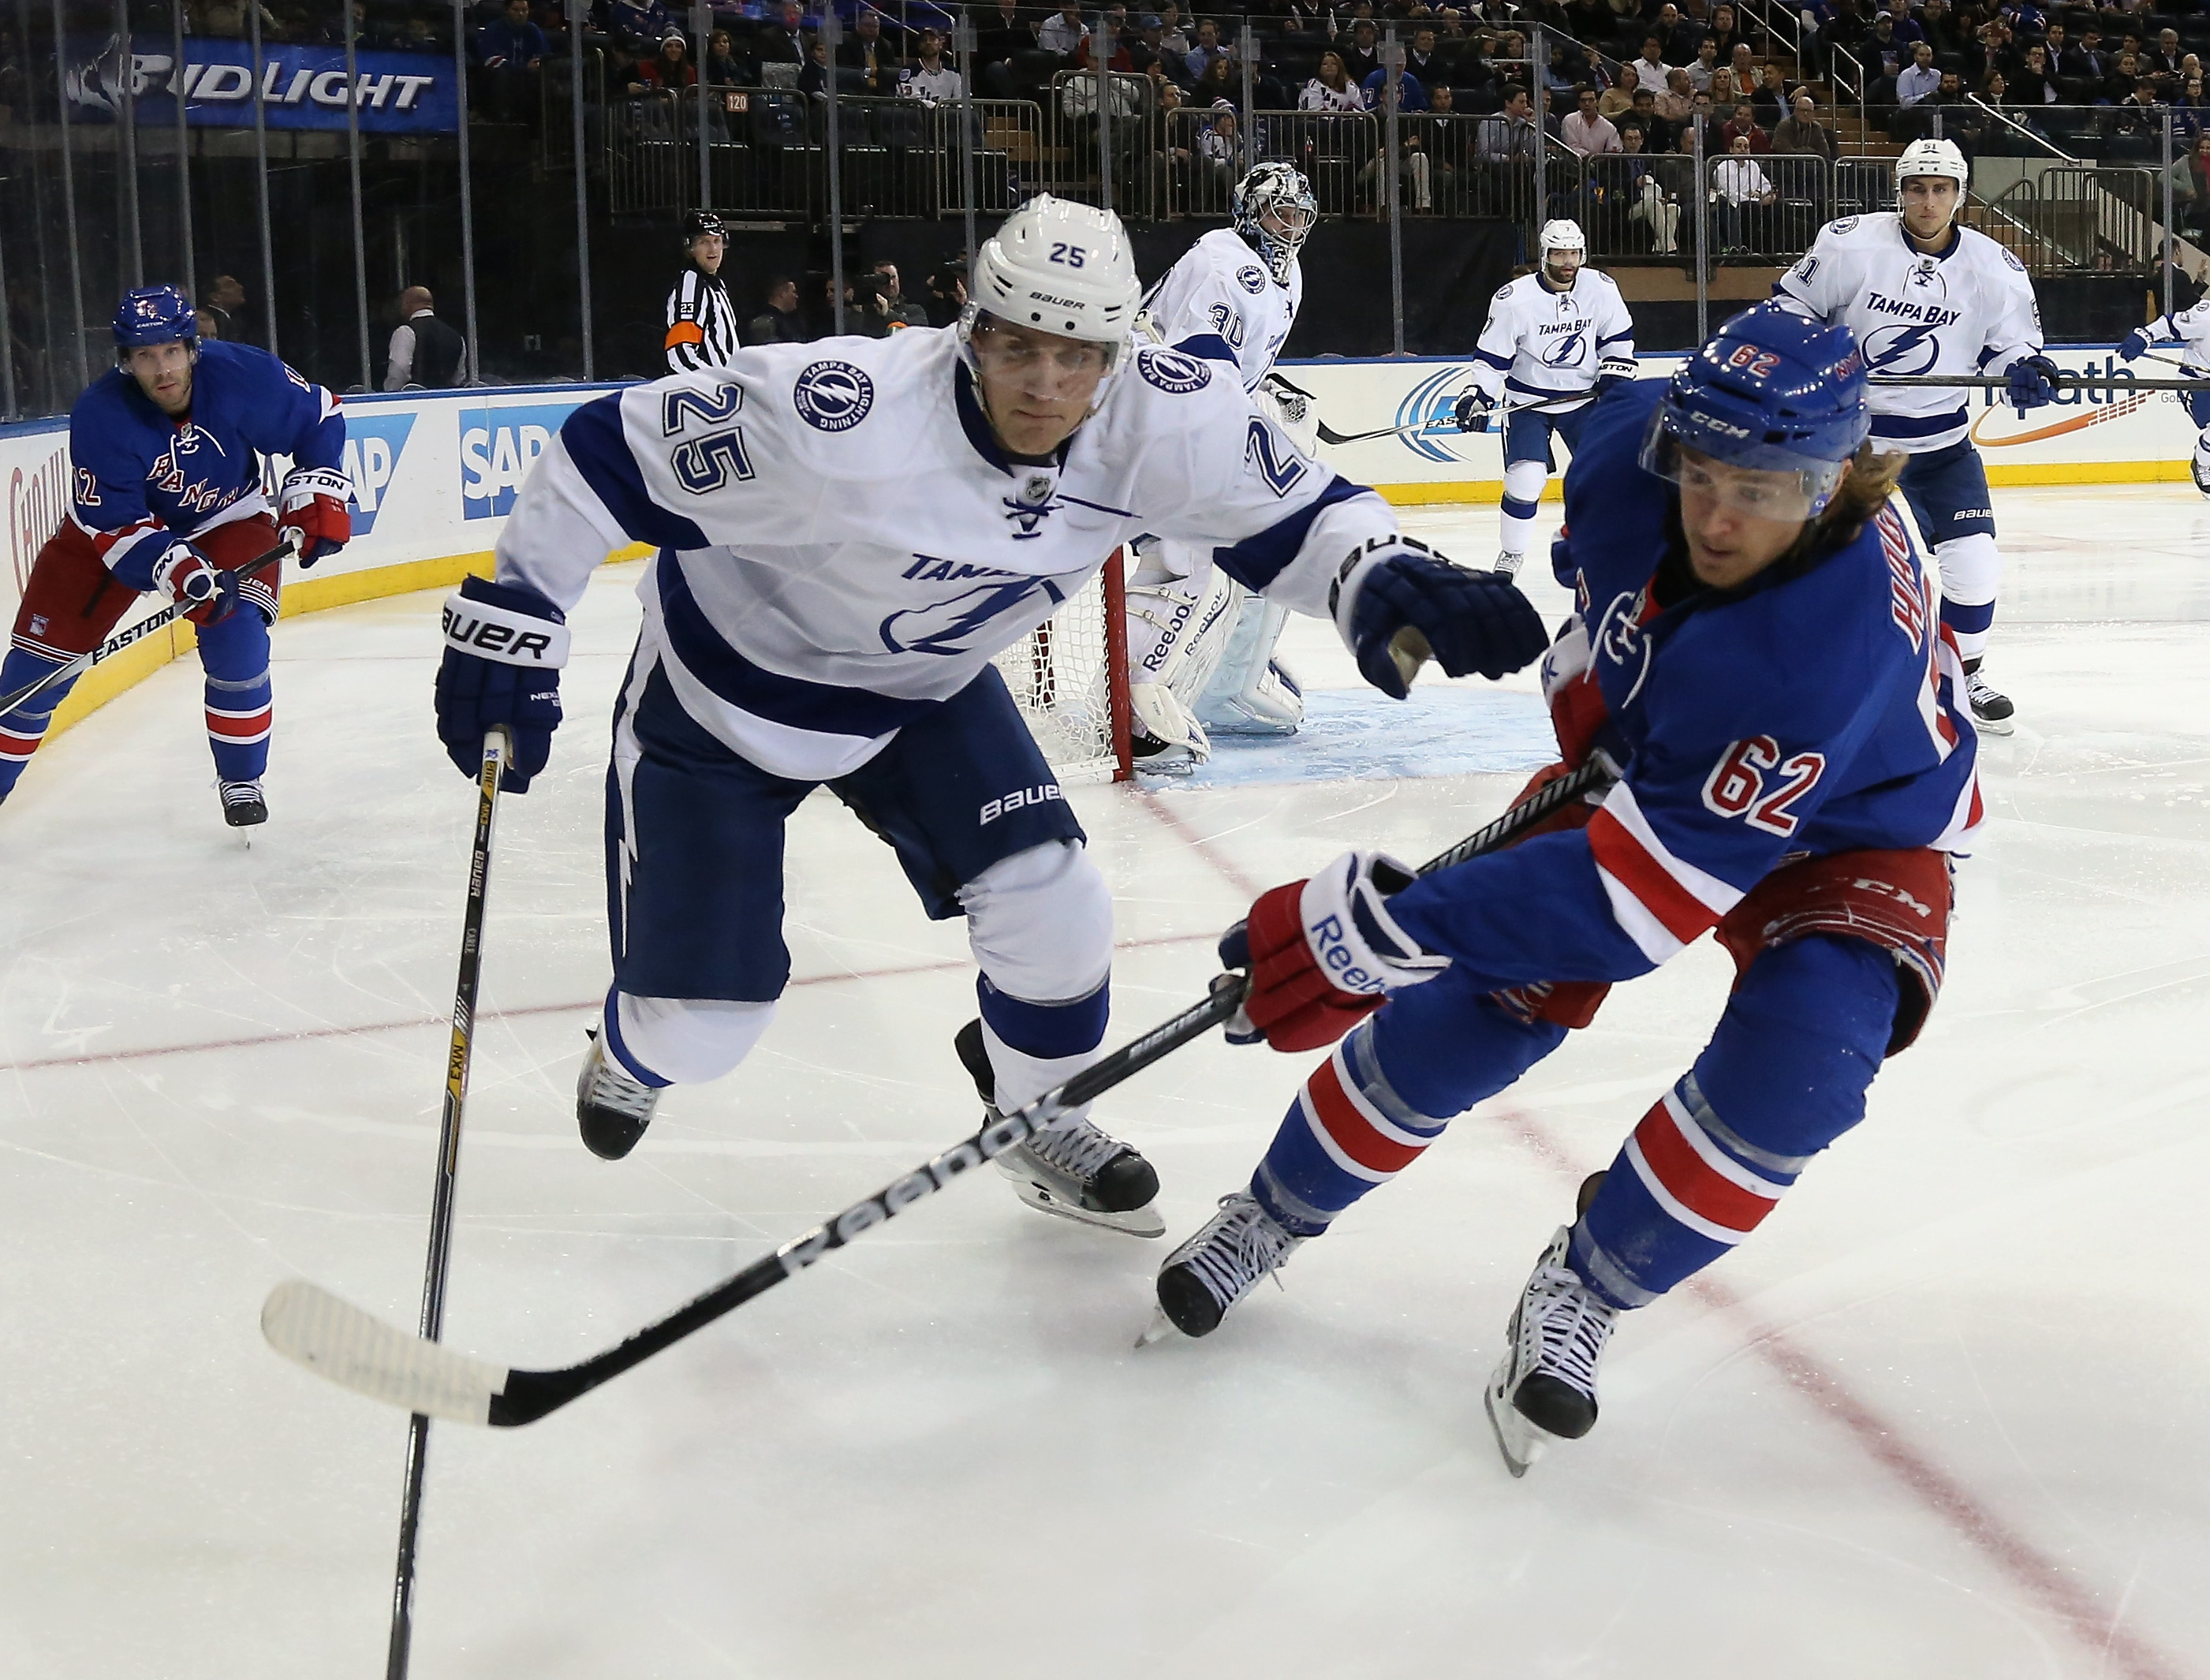 How to Watch Lightning vs. Rangers, Eastern Conference Finals Live